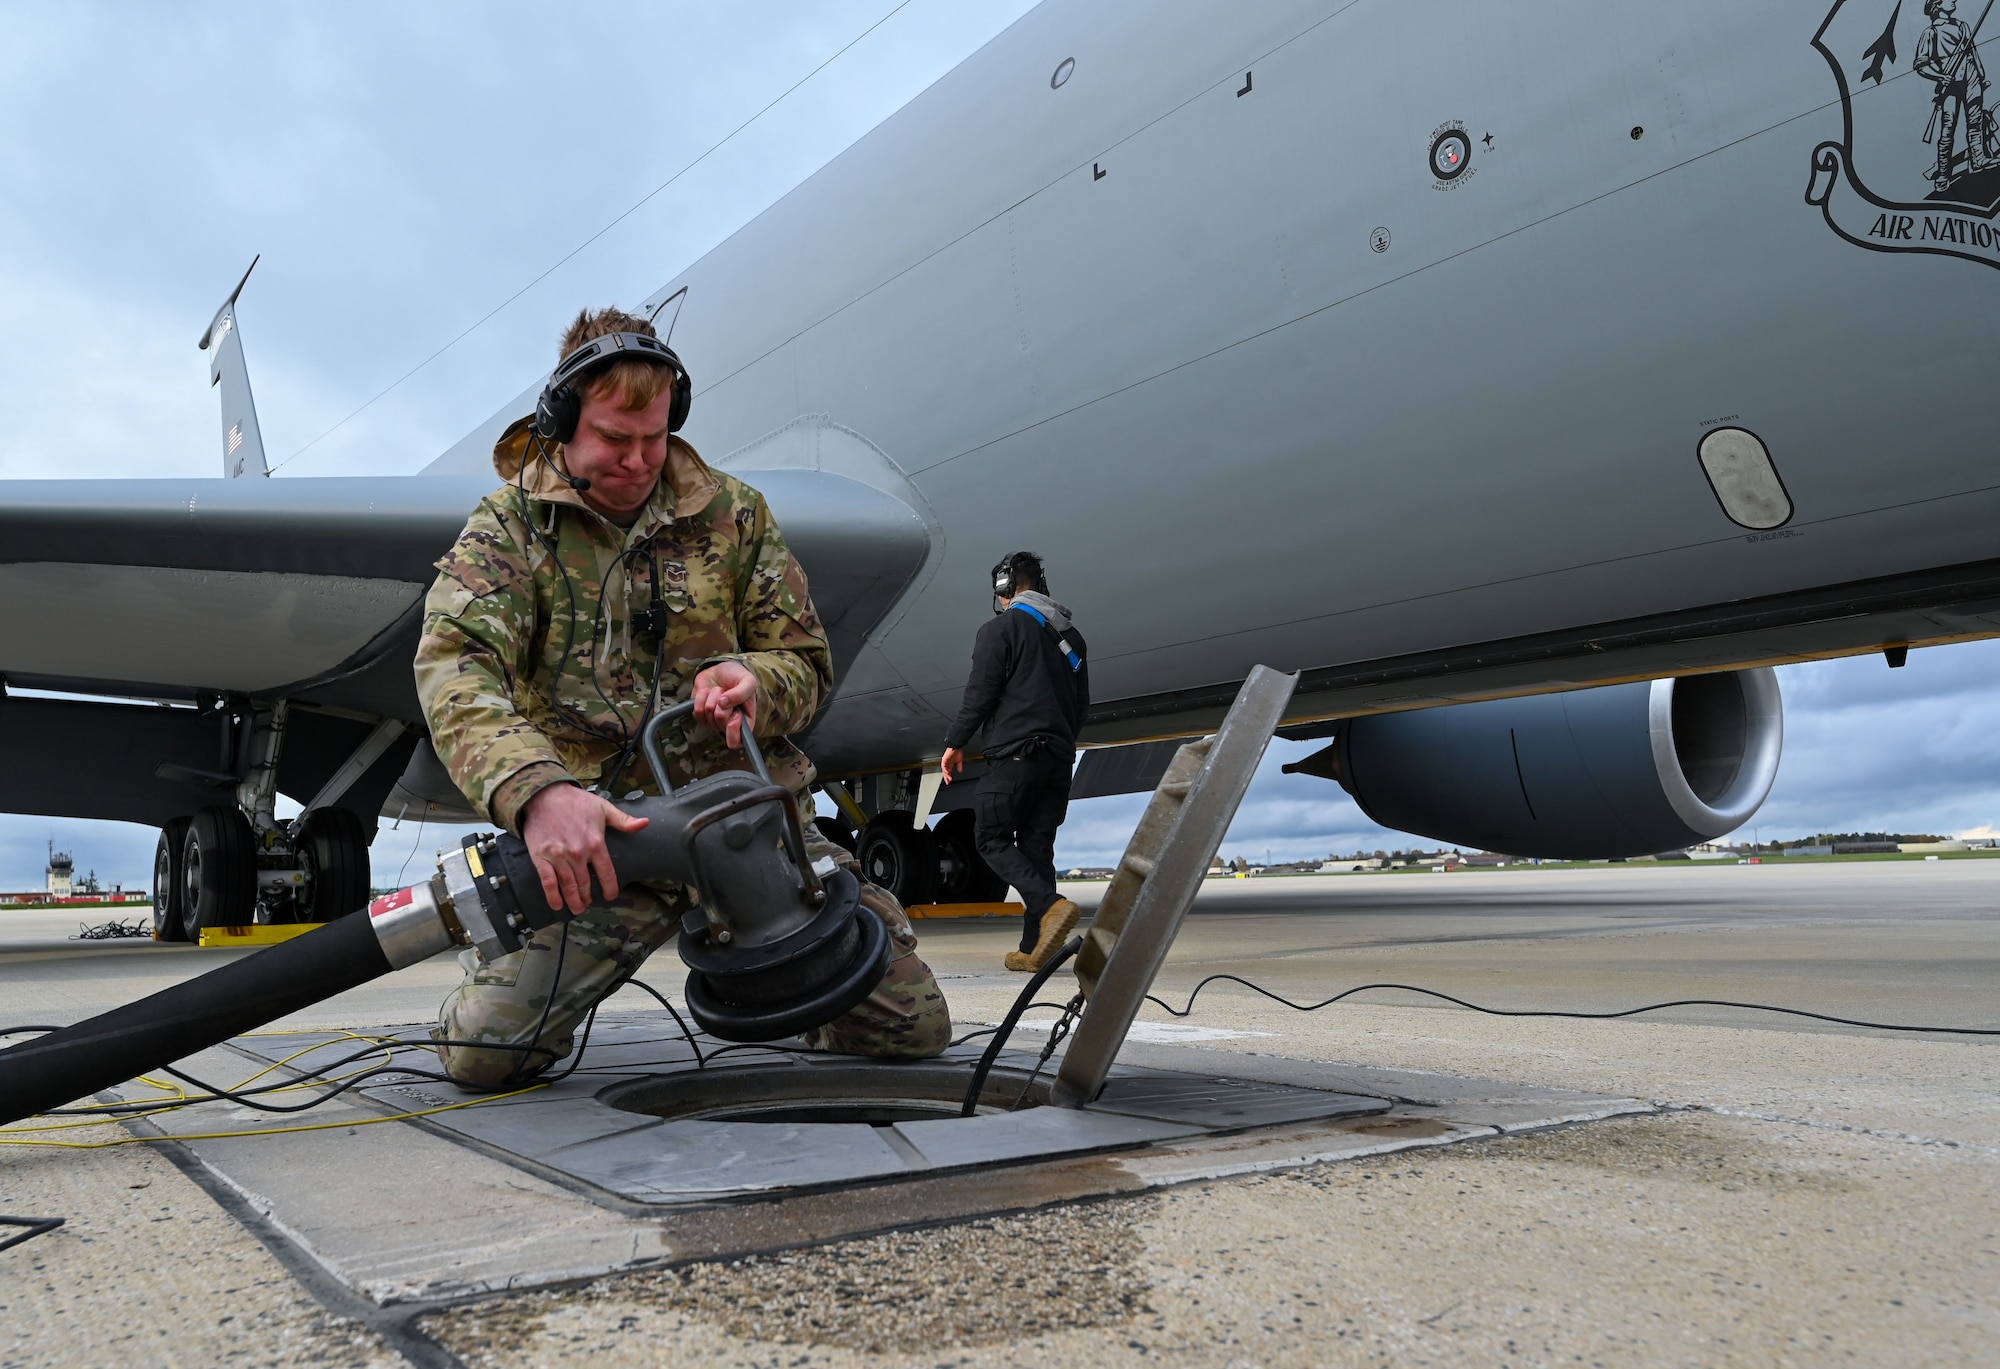 An Airman connects a hose to an underground fuel pit.